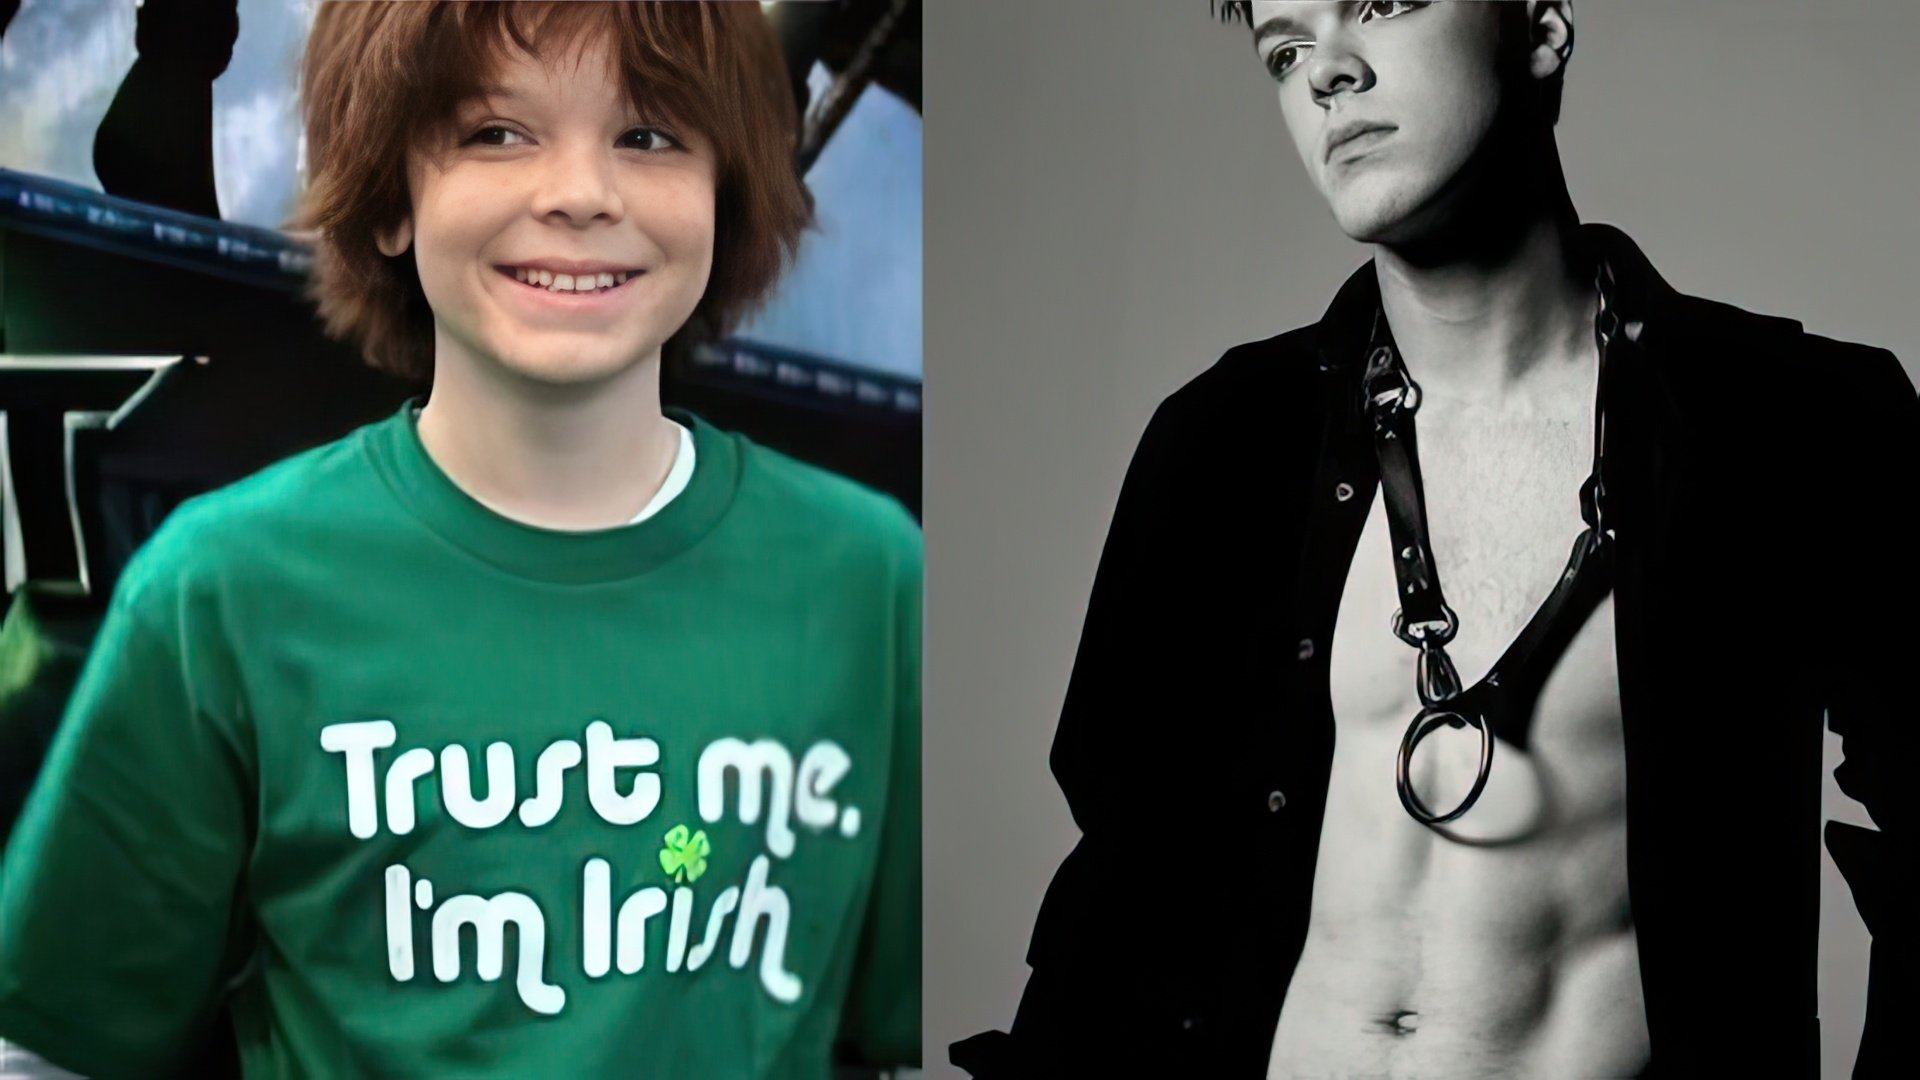 Cameron Monaghan in his childhood and now